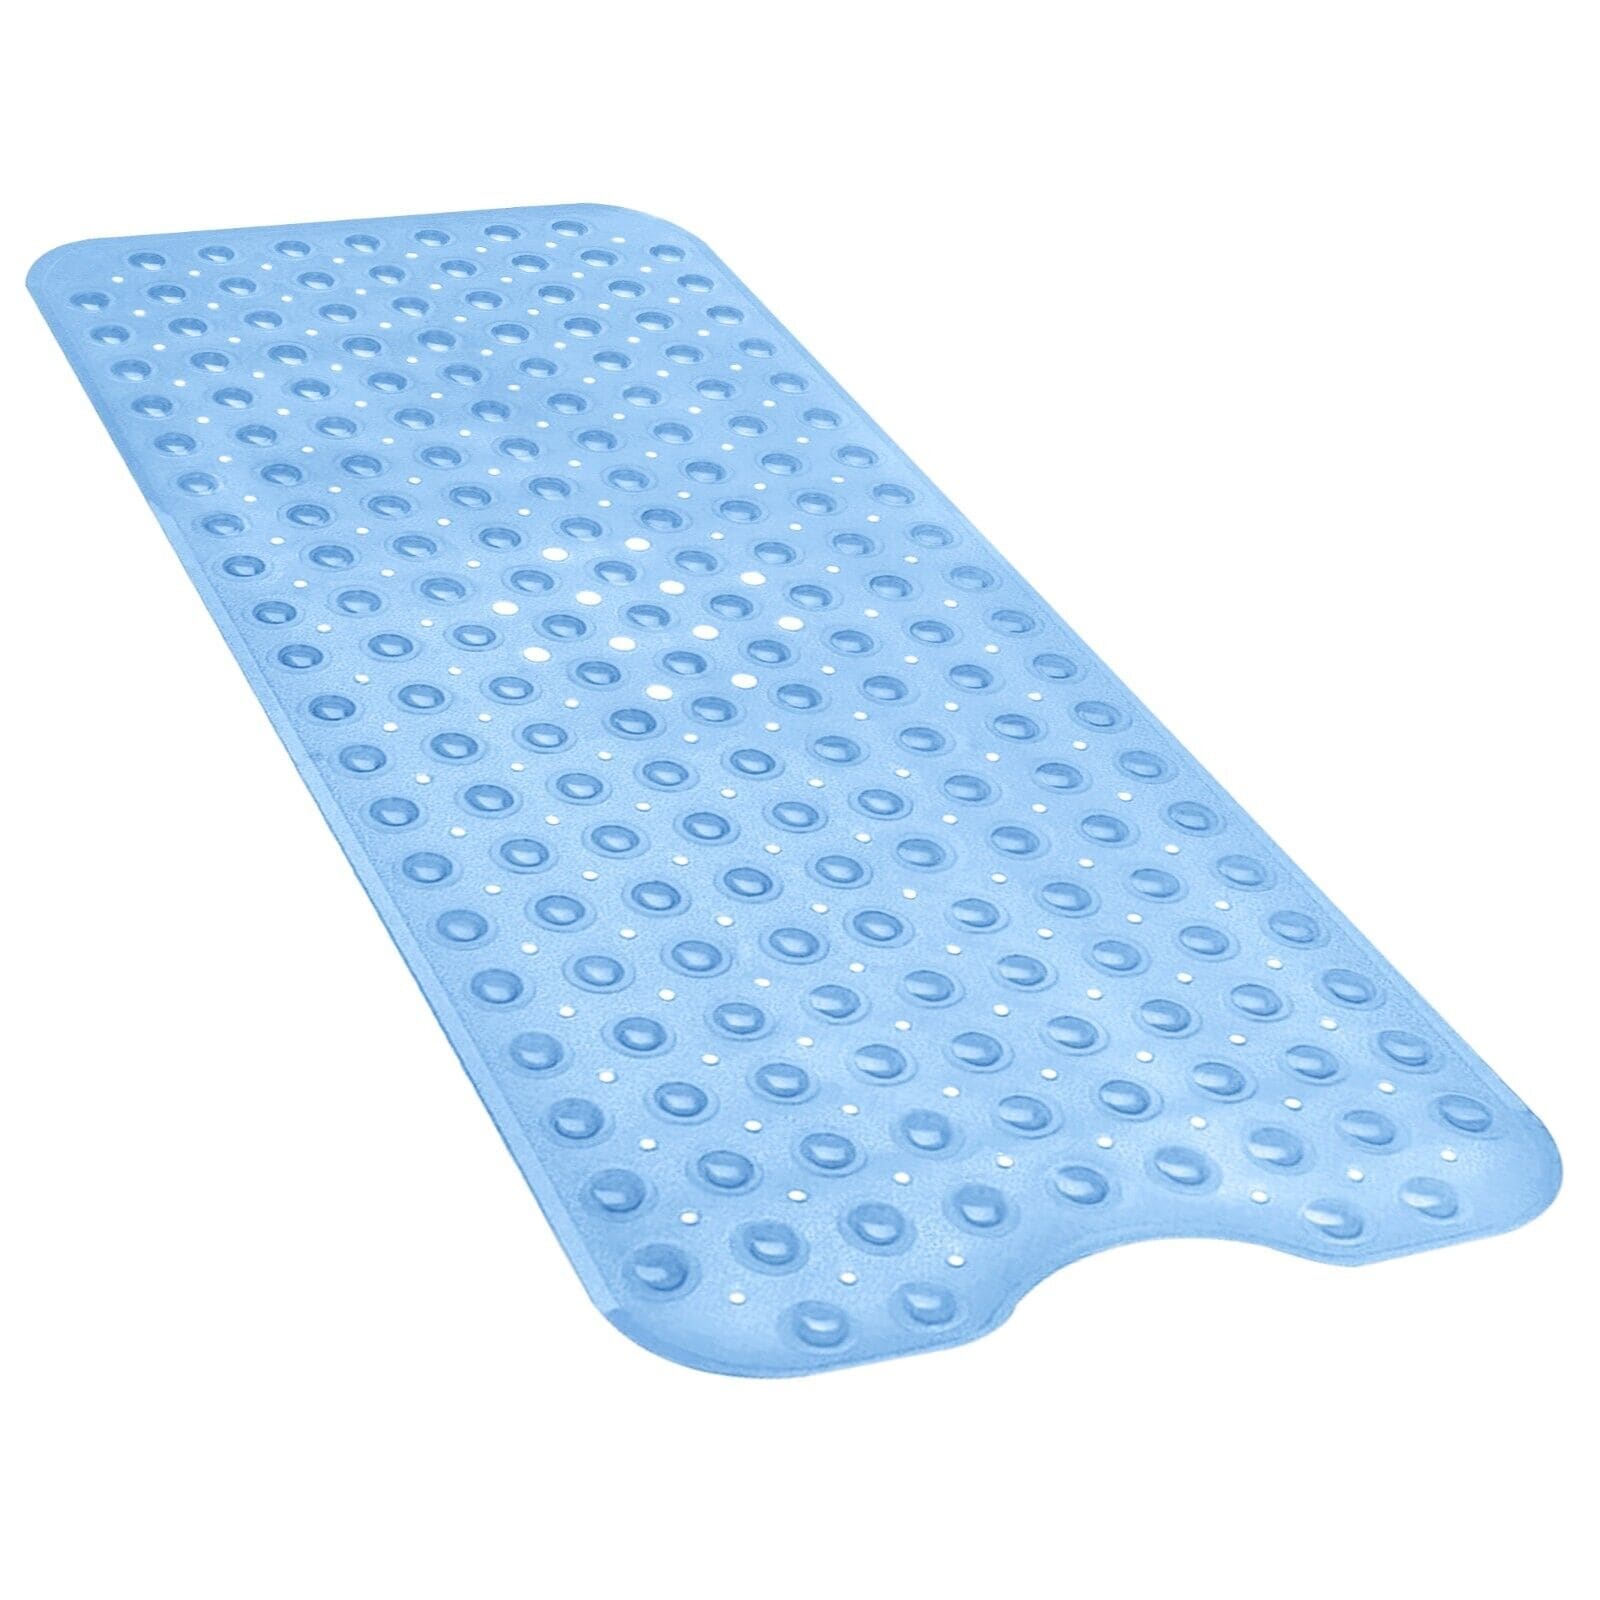 https://ak1.ostkcdn.com/images/products/is/images/direct/62e9de842a50ffeccac0d49b4bcba807e525bb54/Non-Slip-Bathtub-Mat-with-Suction-Cups-Washable.jpg